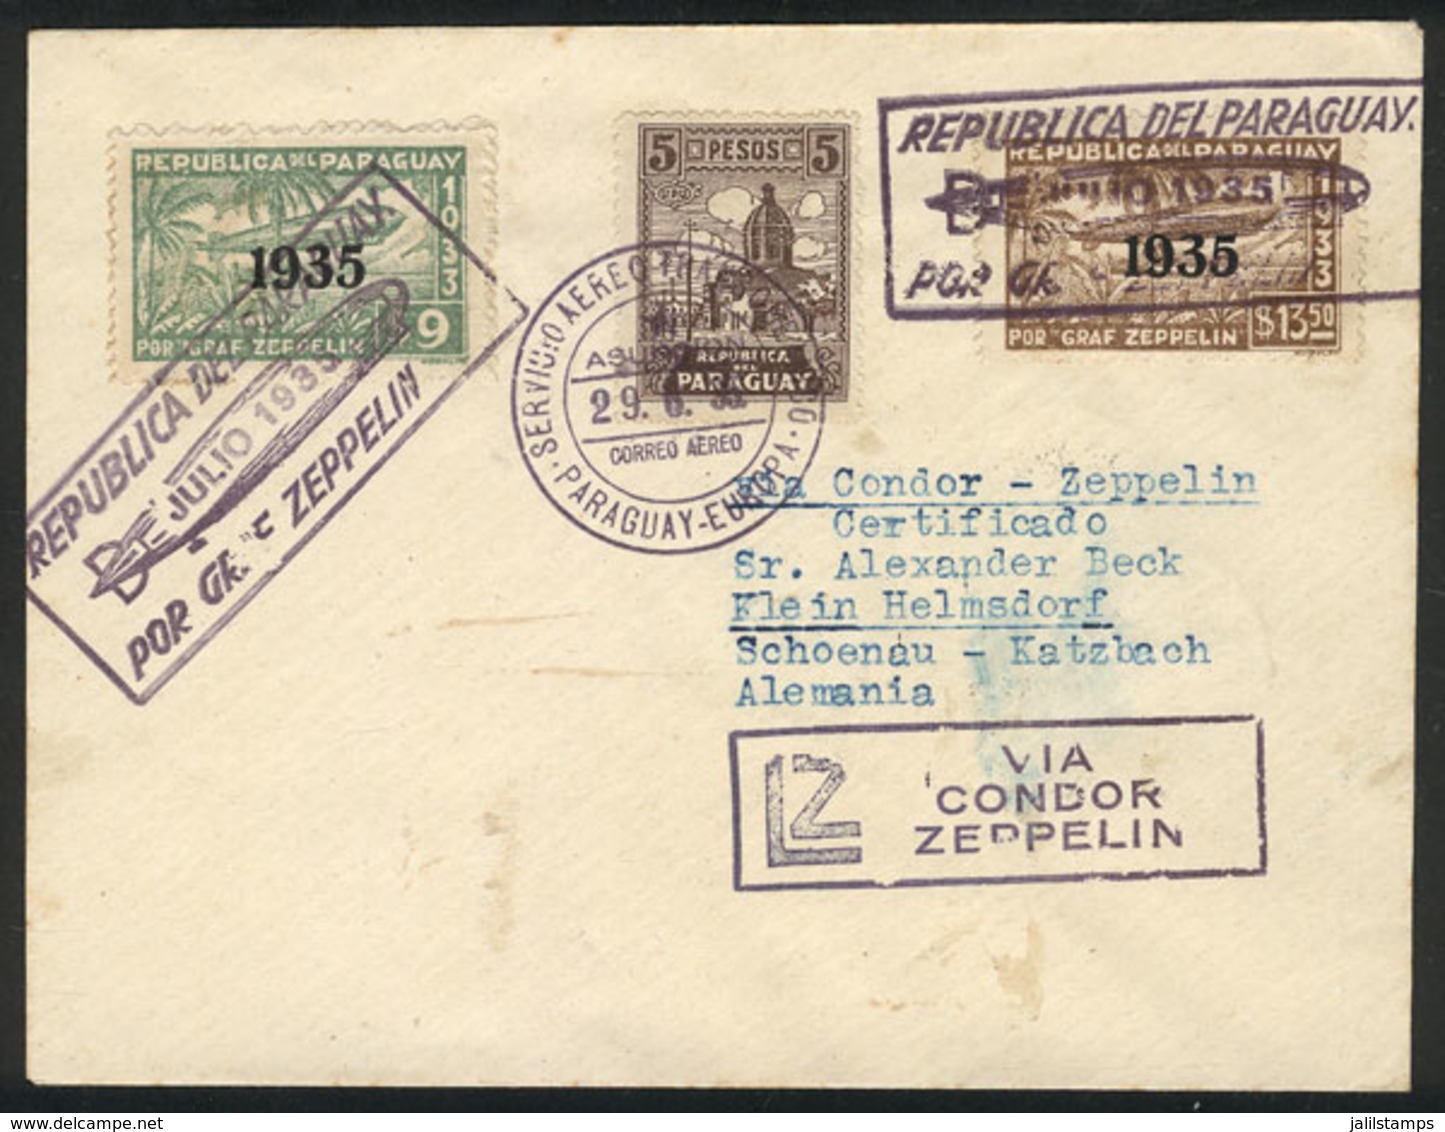 800 PARAGUAY: 29/JUN/1935 Asunción - Germany: Cover Flown By Zeppelin, Arrival Backstamp, VF Quality! - Paraguay